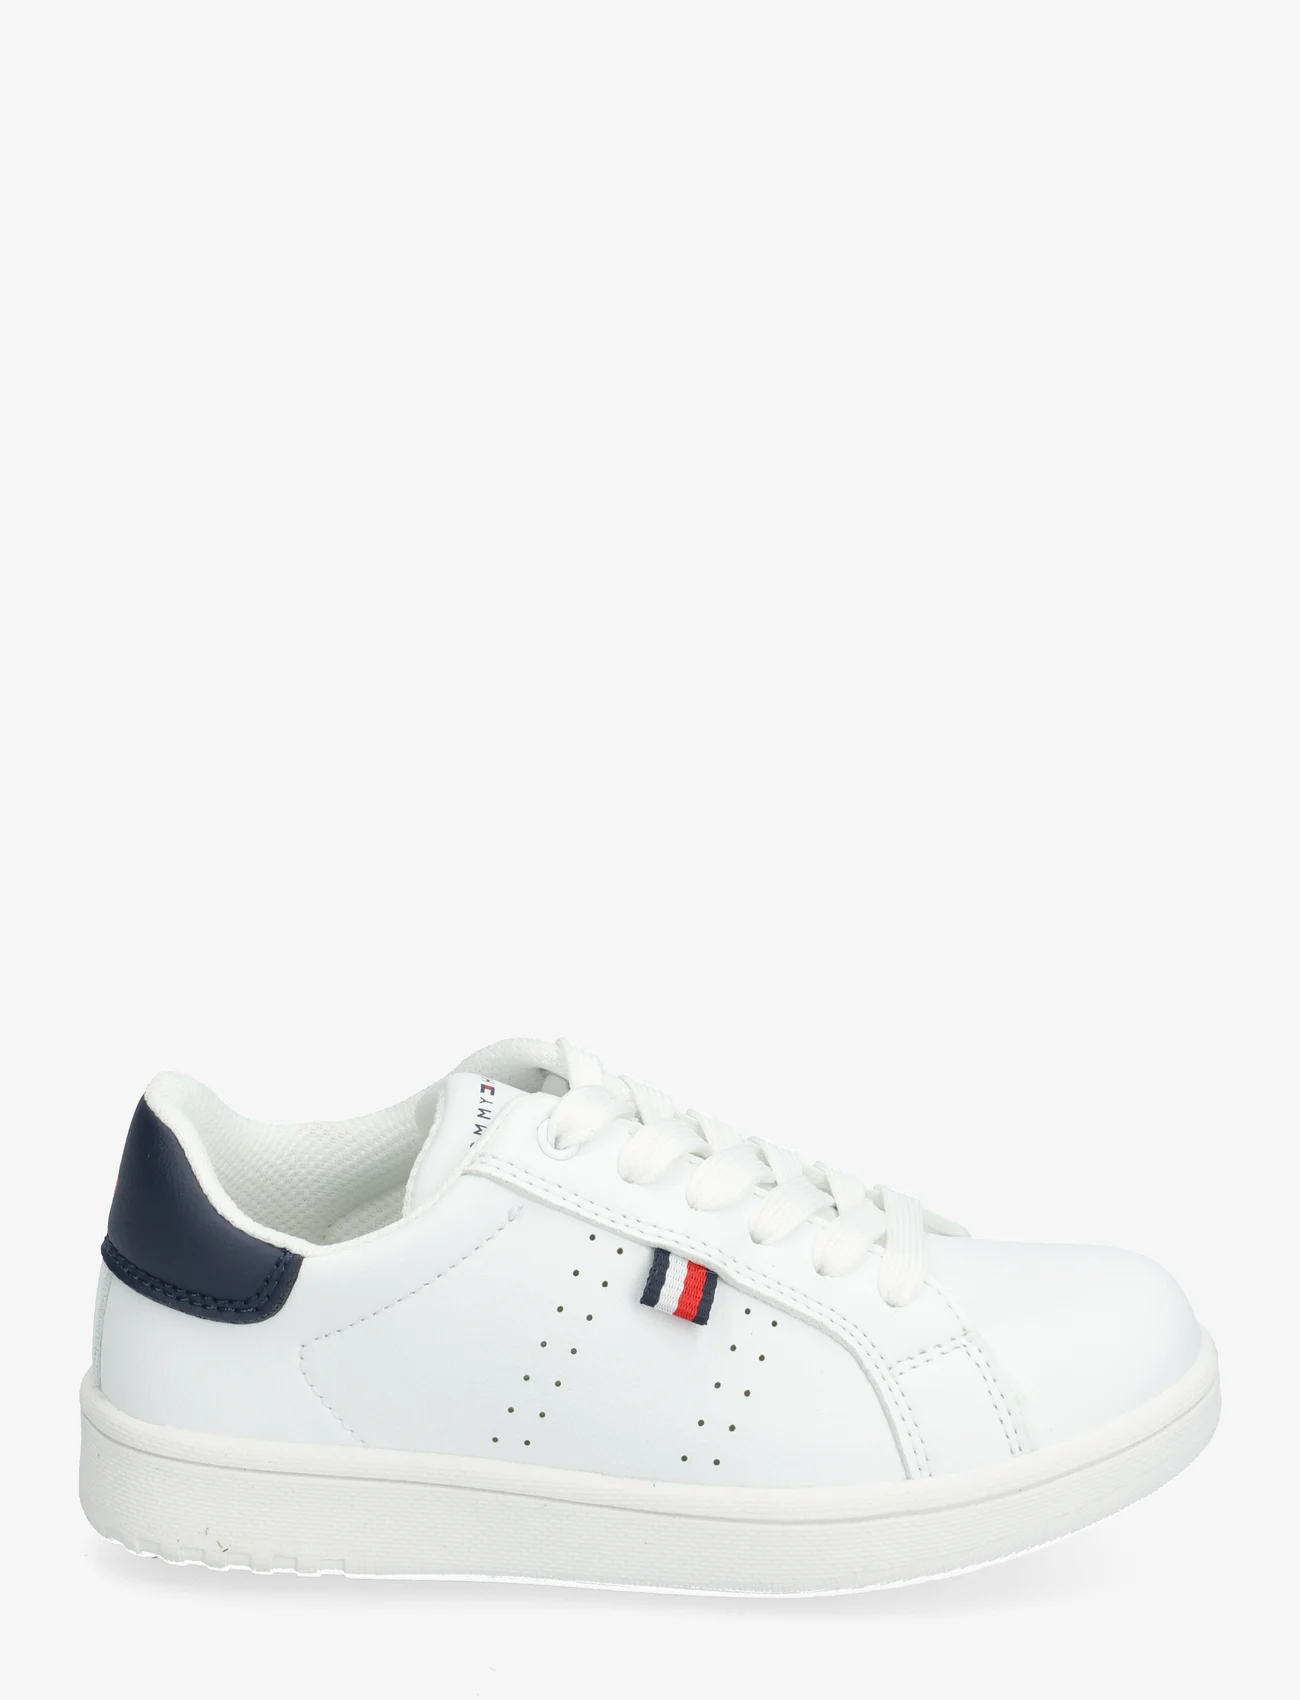 Tommy Hilfiger - LOW CUT LACE-UP SNEAKER - gode sommertilbud - white - 1